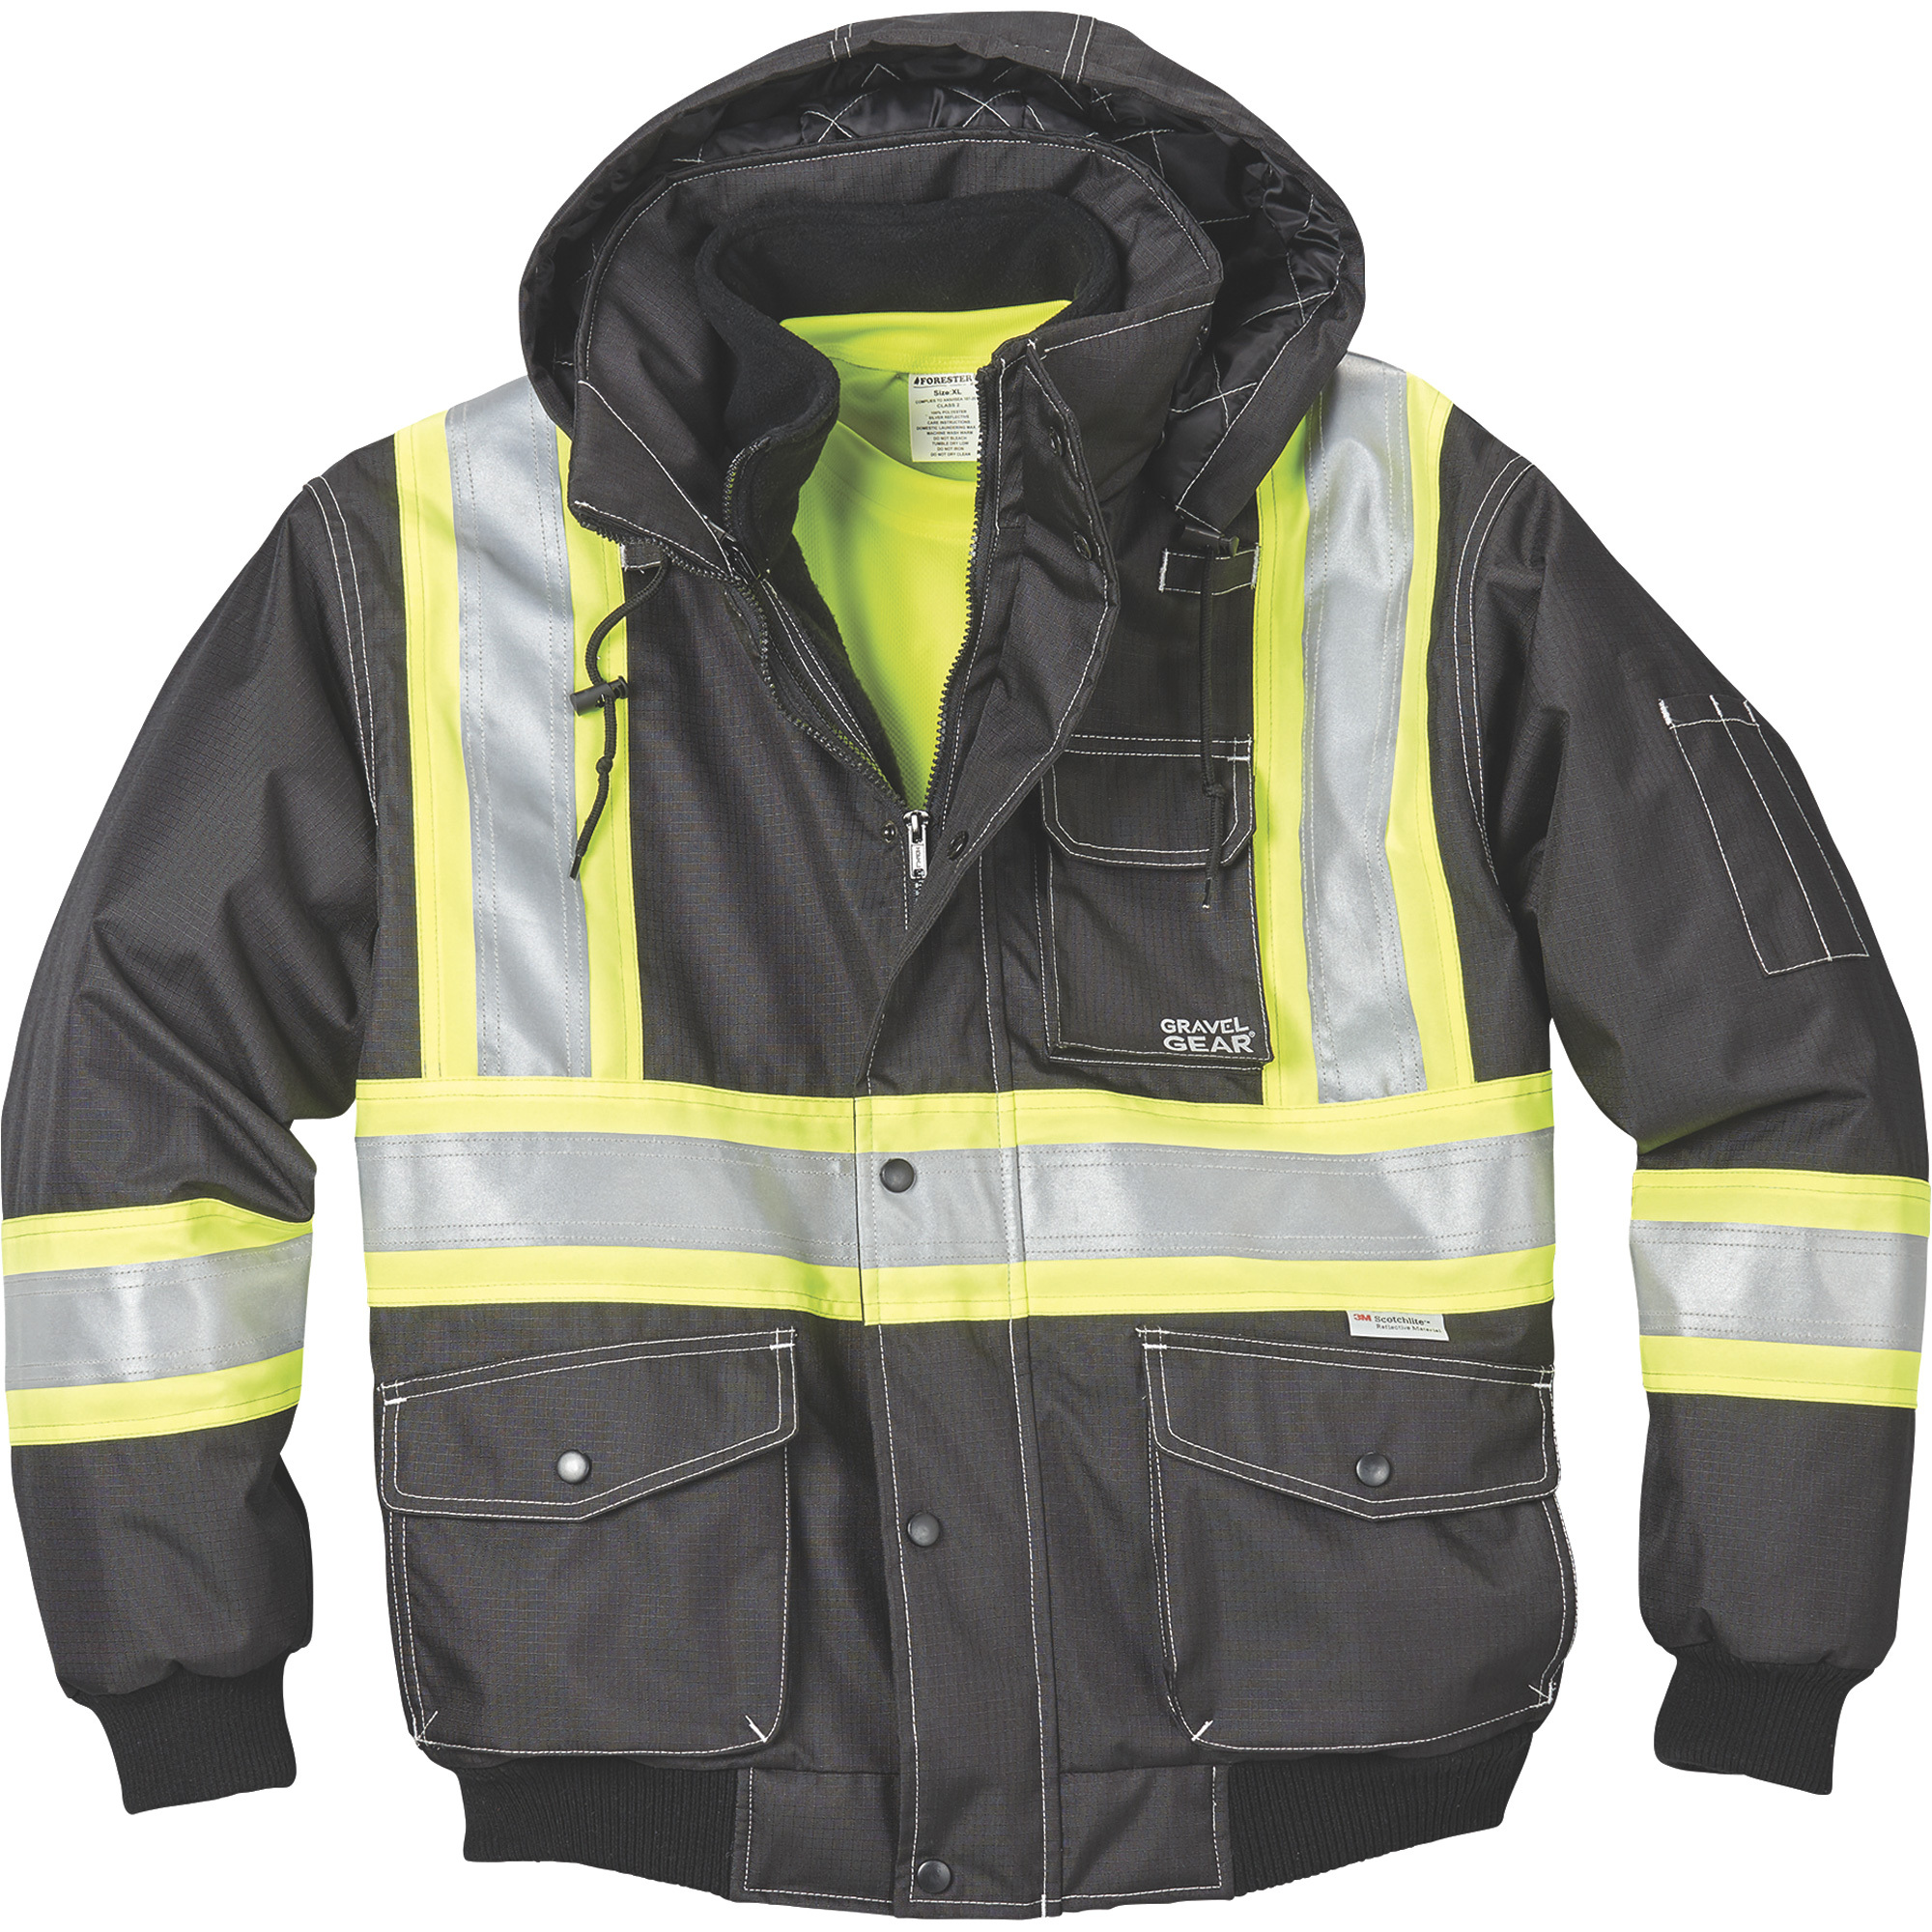 Gravel Gear Men's Class 1 High Visibility 3-in-1 Bomber Jacket â Lime, Medium